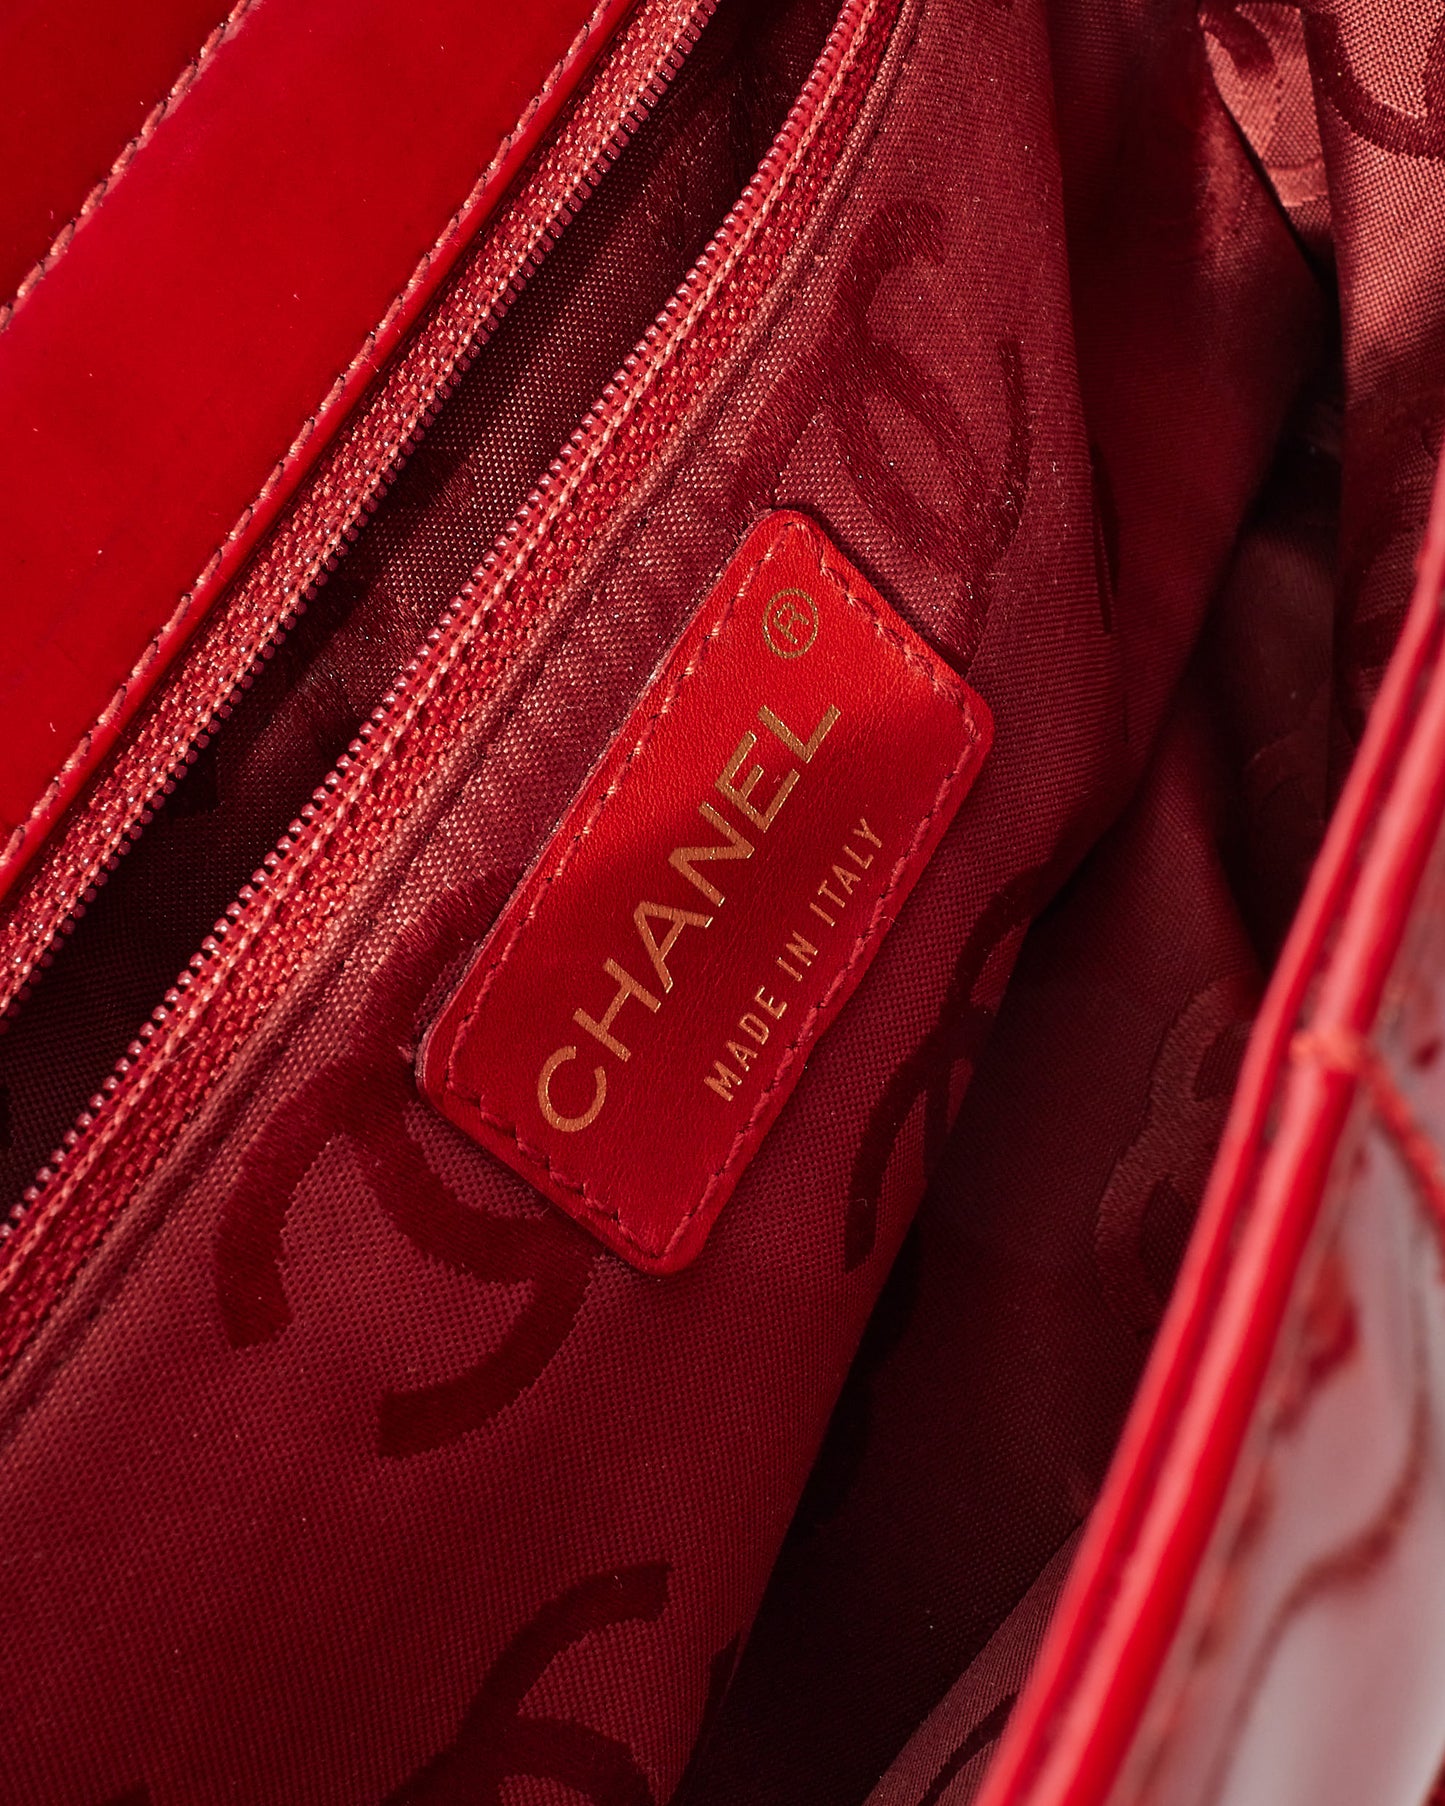 Chanel Vintage Red Patent Leather "Chocolate Bar" Tote Bag